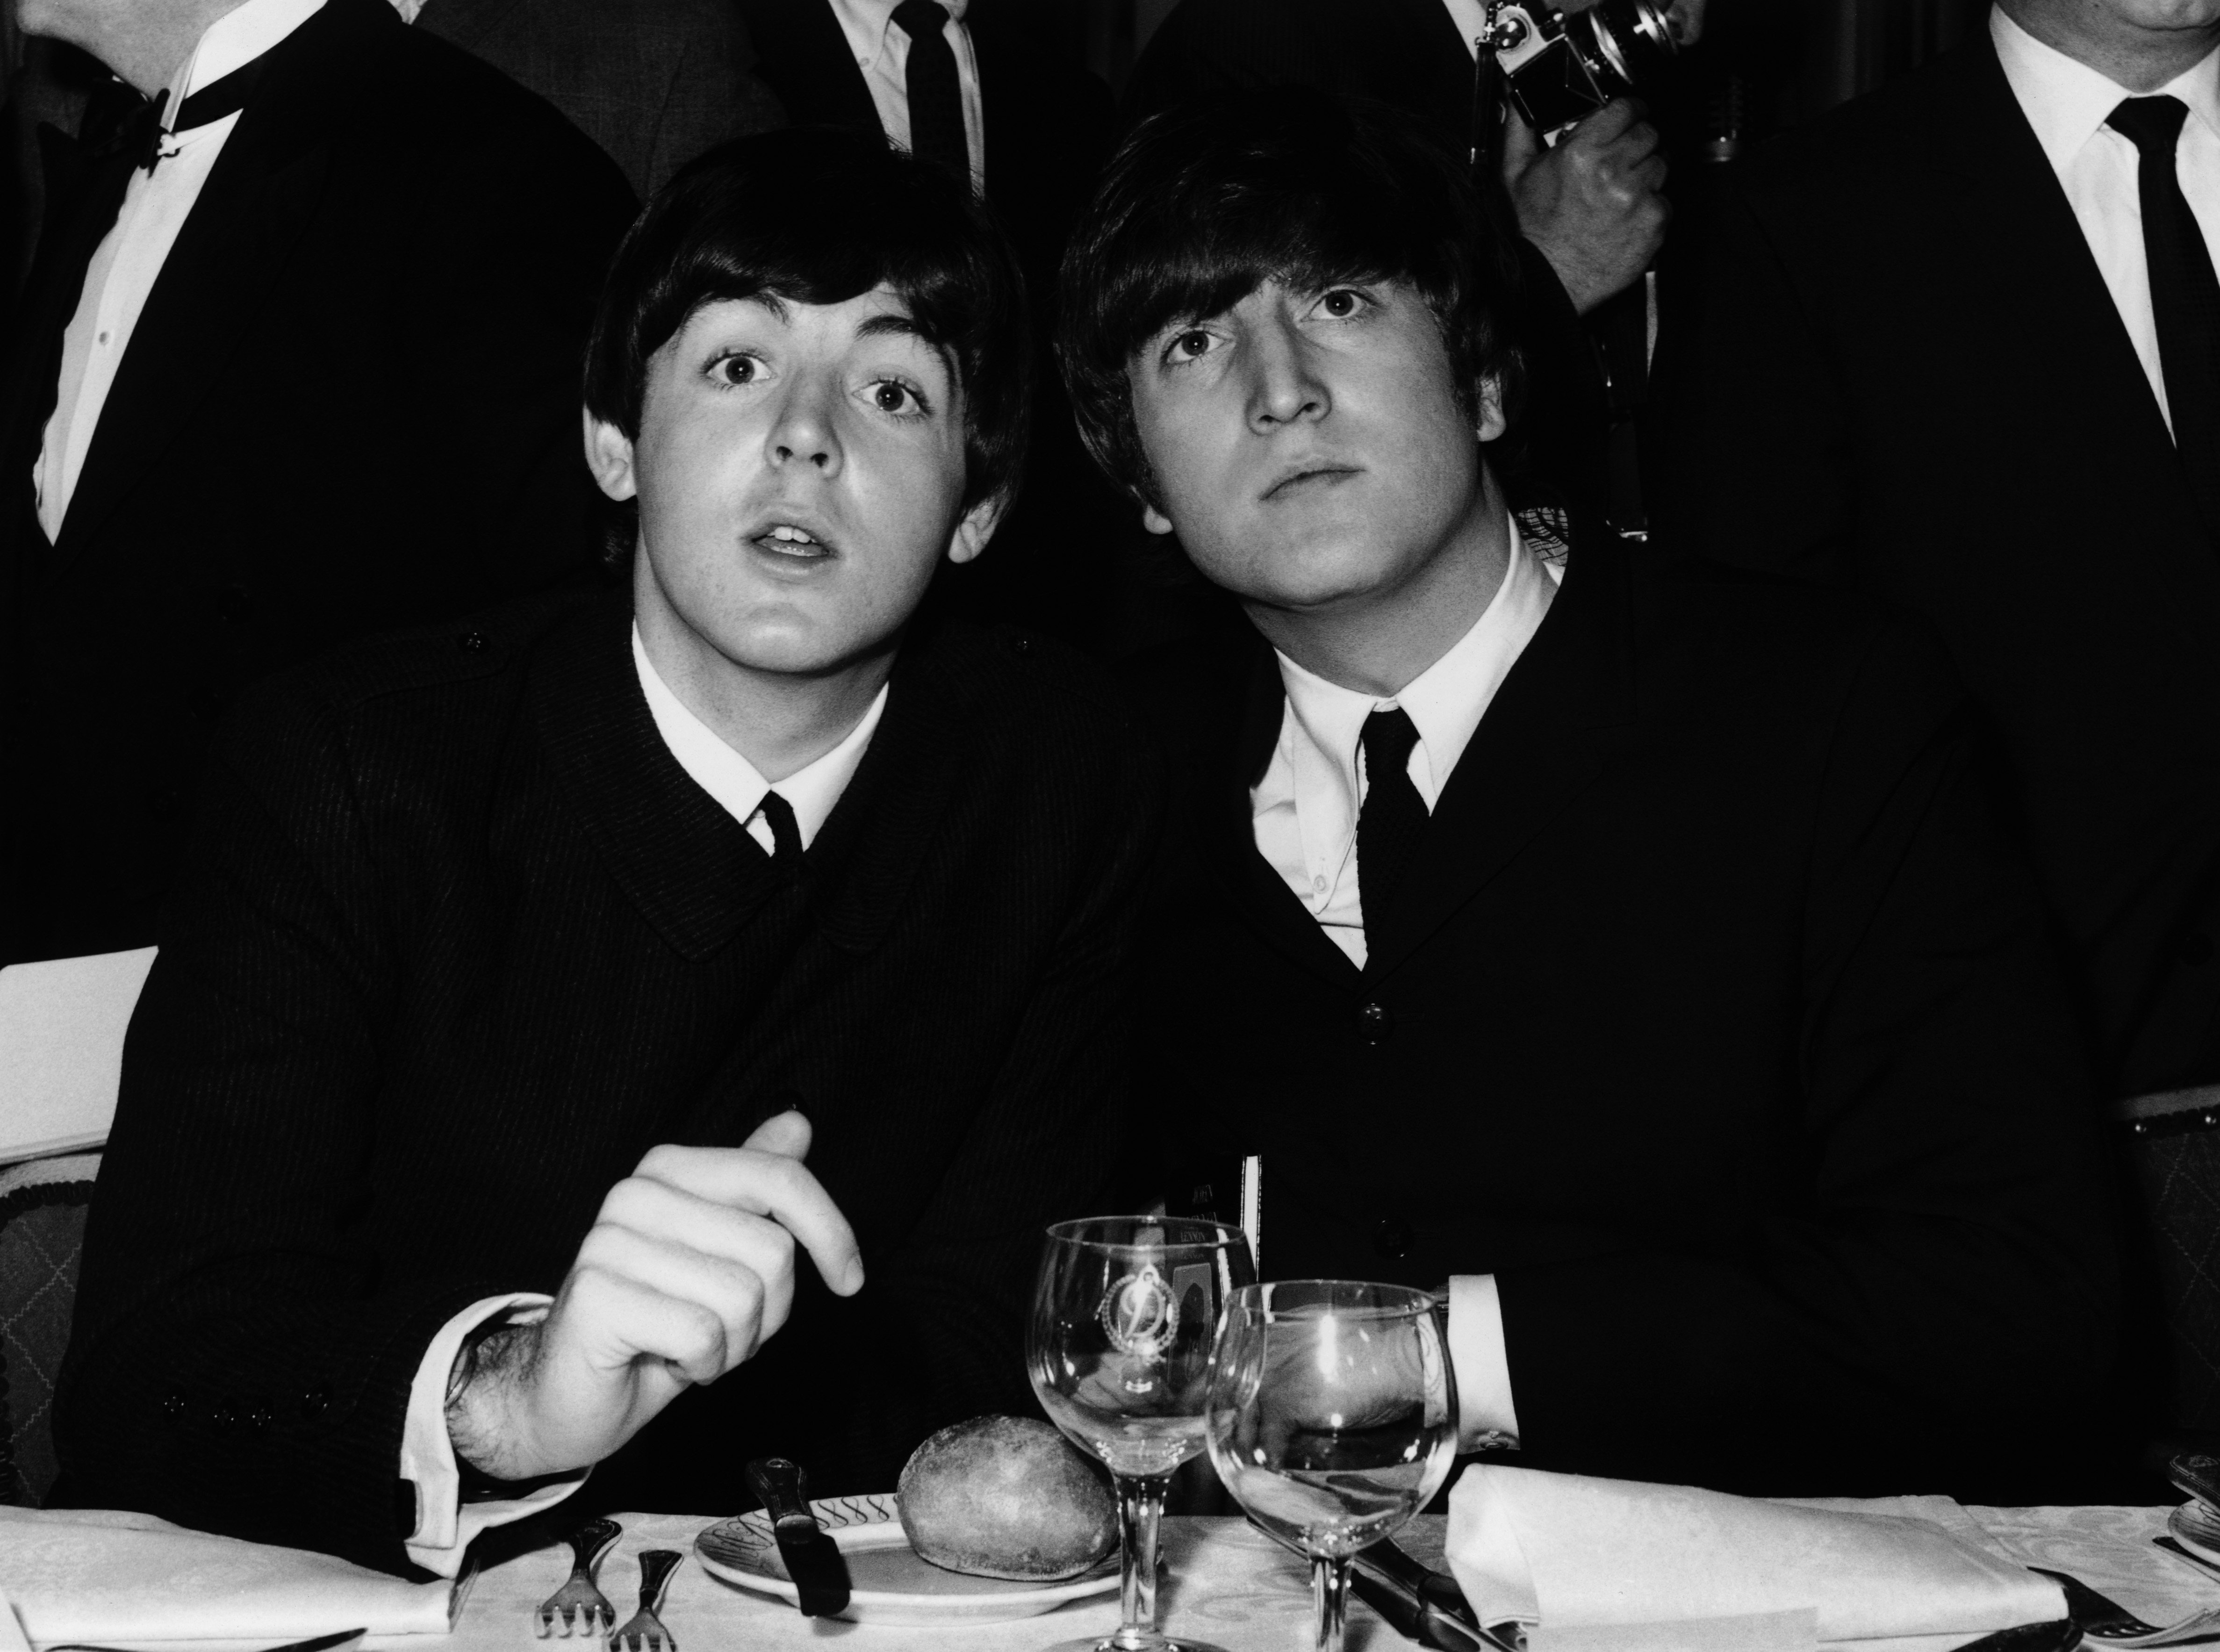 John Lennon and Paul McCartney during 1963. | Source: Getty Images